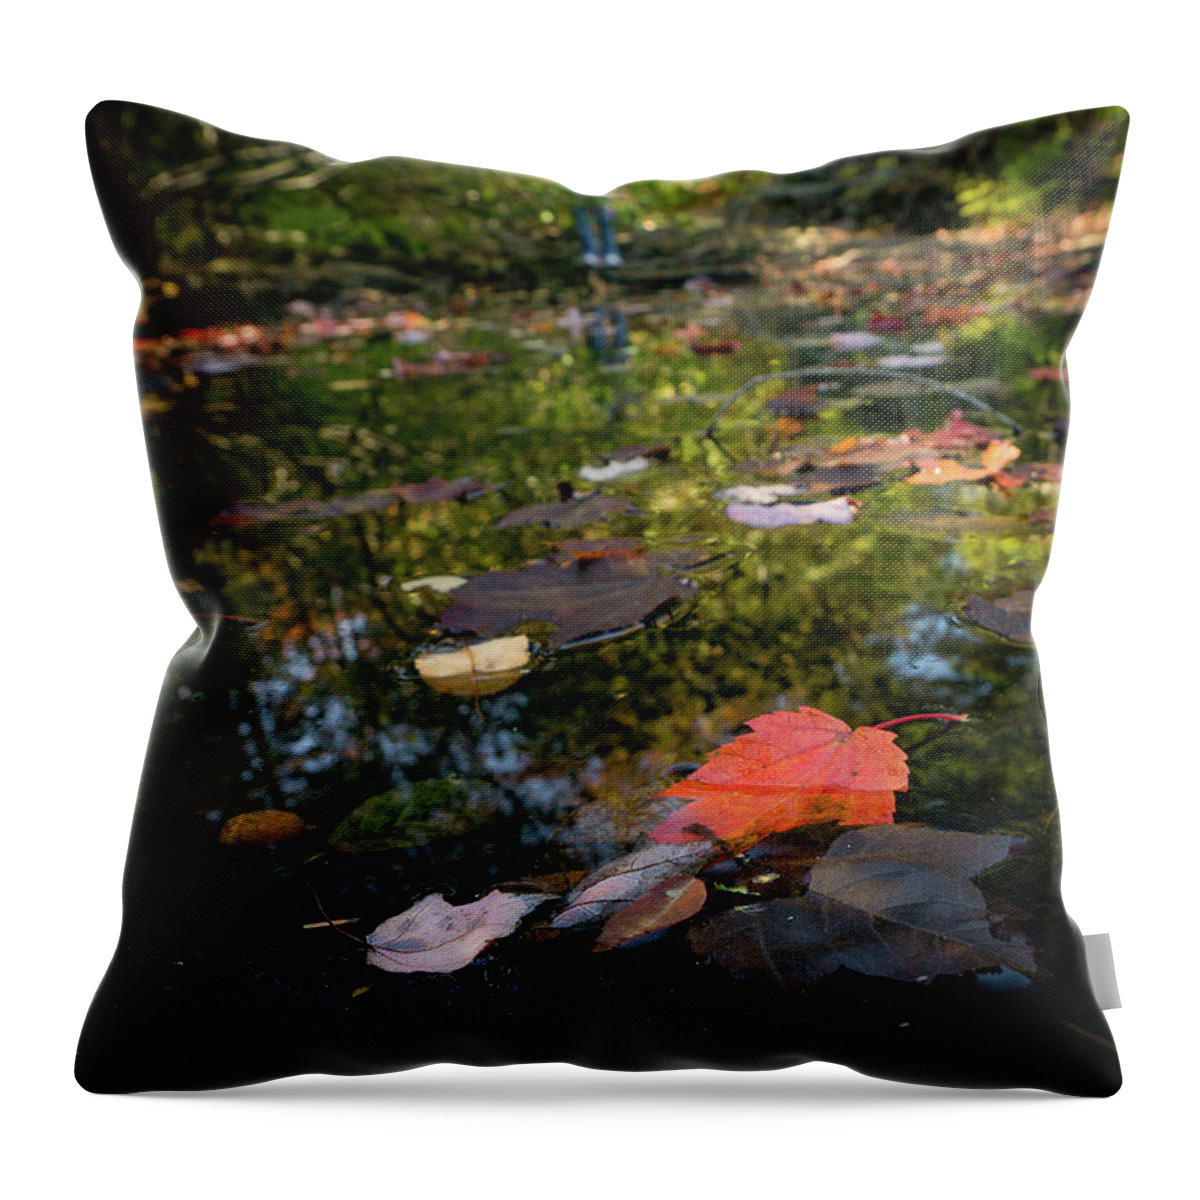 Autumn Throw Pillow featuring the photograph Autumn Leaf by Silvia Marcoschamer